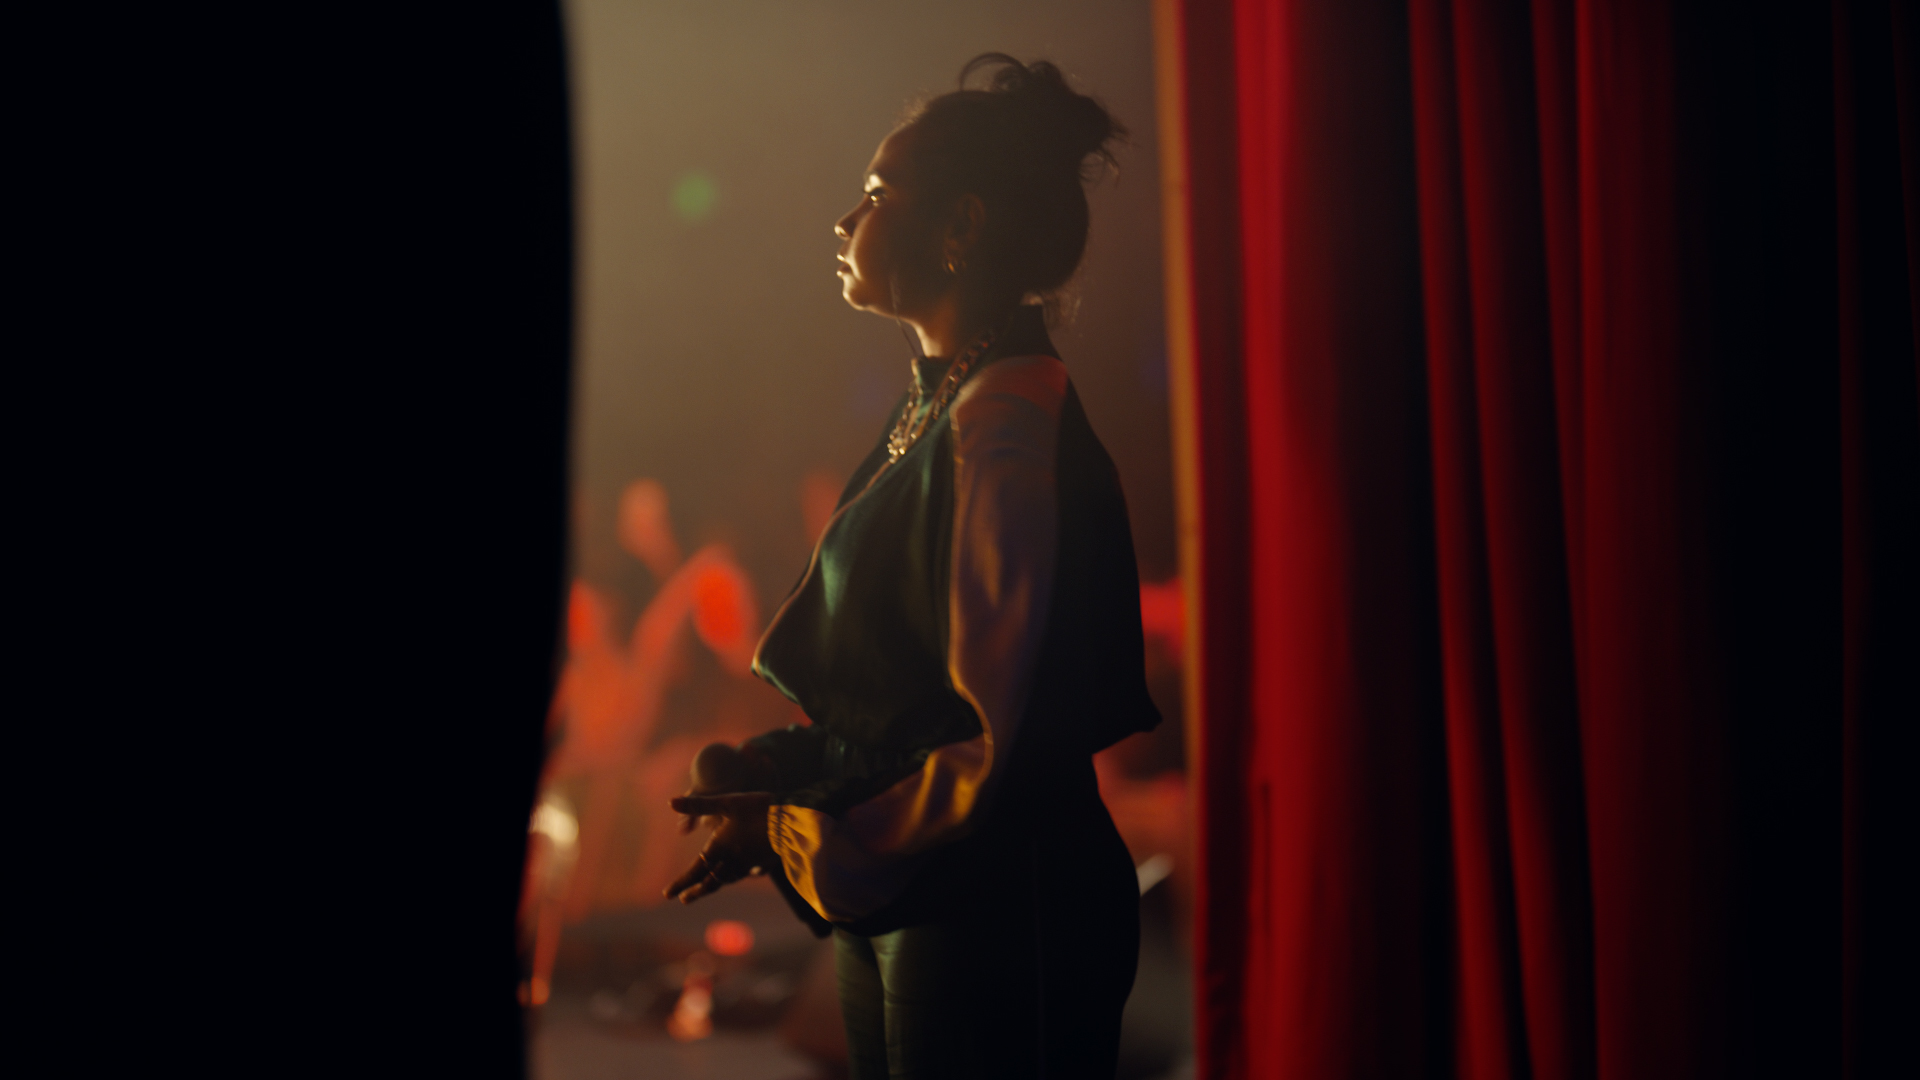 Still from google Helpfulness campaign TVC featuring a. young woman flanked by stage curtains on stage